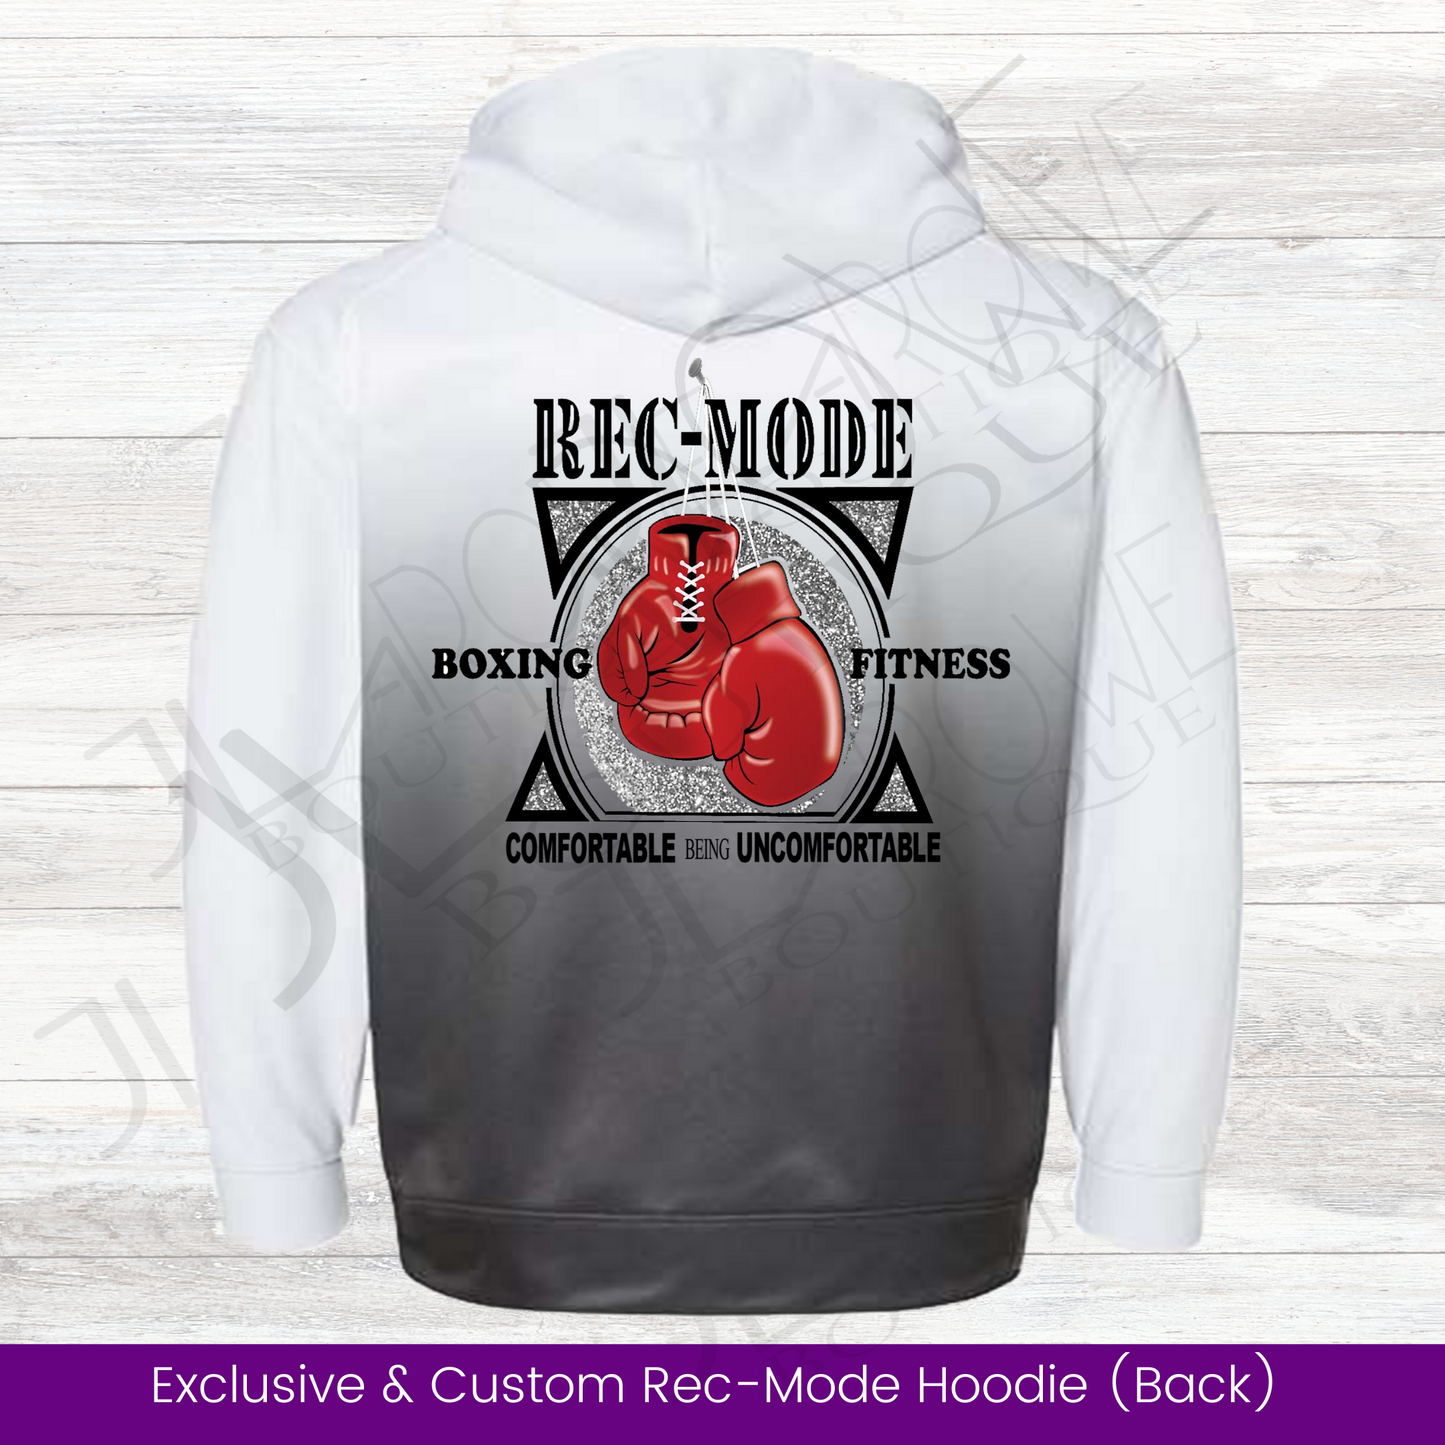 Rec-Mode Boxing & Fitness Hoodie